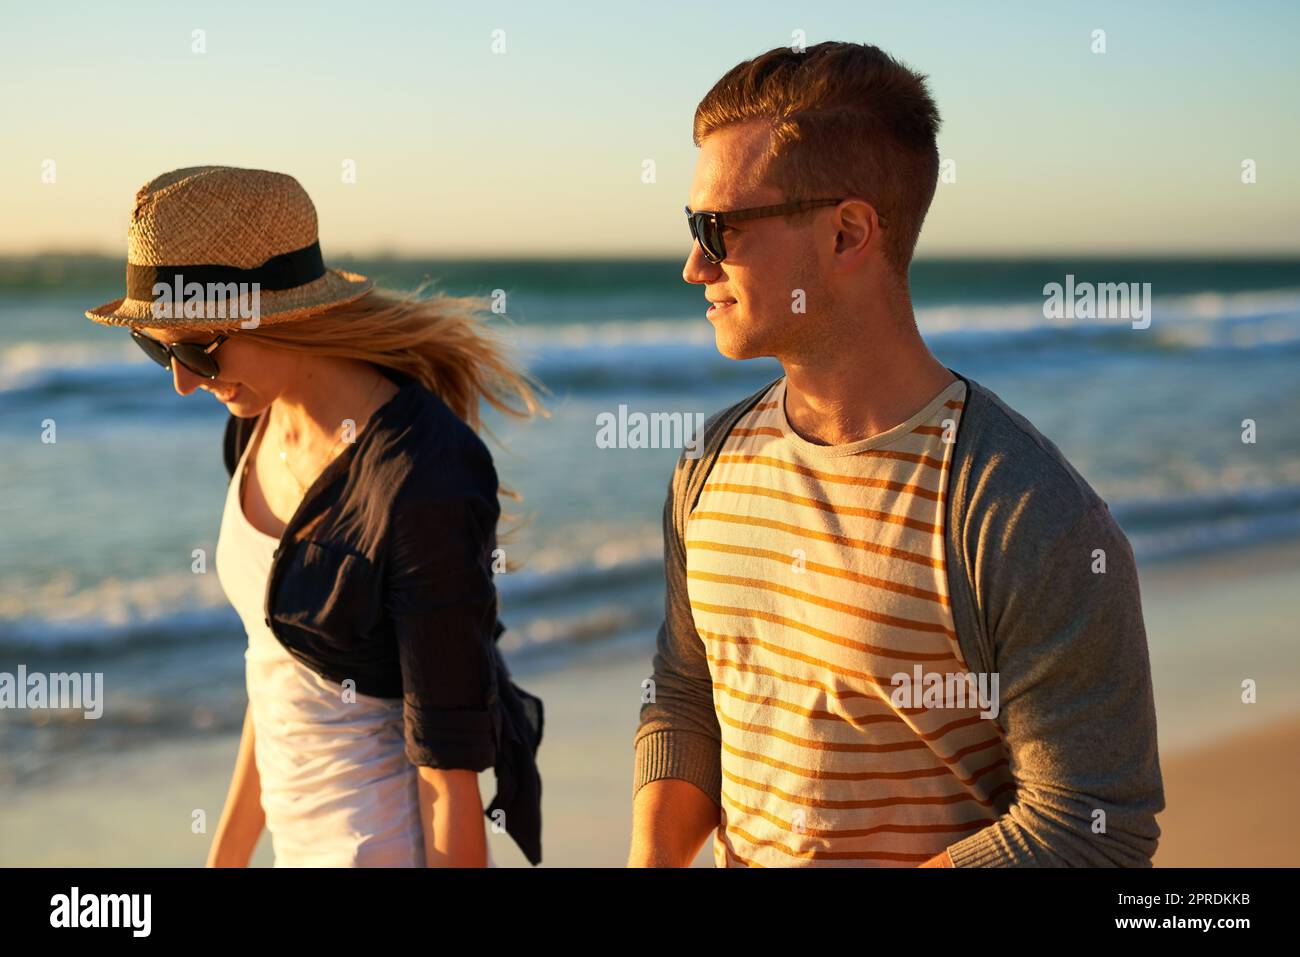 Summer, the season to fall in love. n affectionate young couple taking a walk together on the beach. Stock Photo